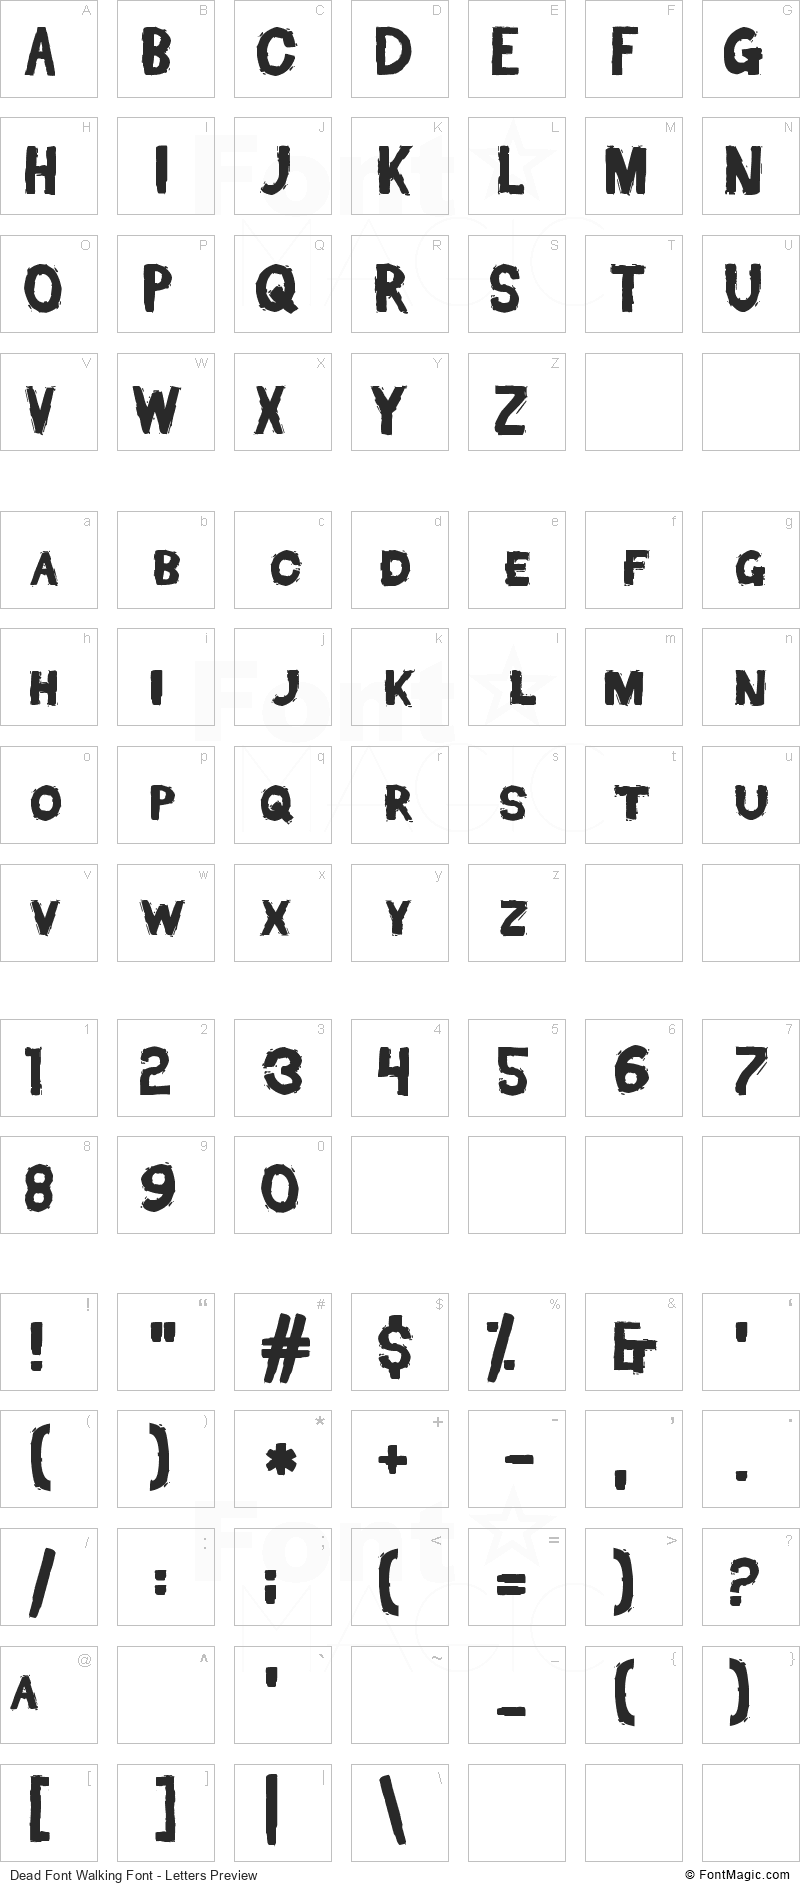 Dead Font Walking Font - All Latters Preview Chart